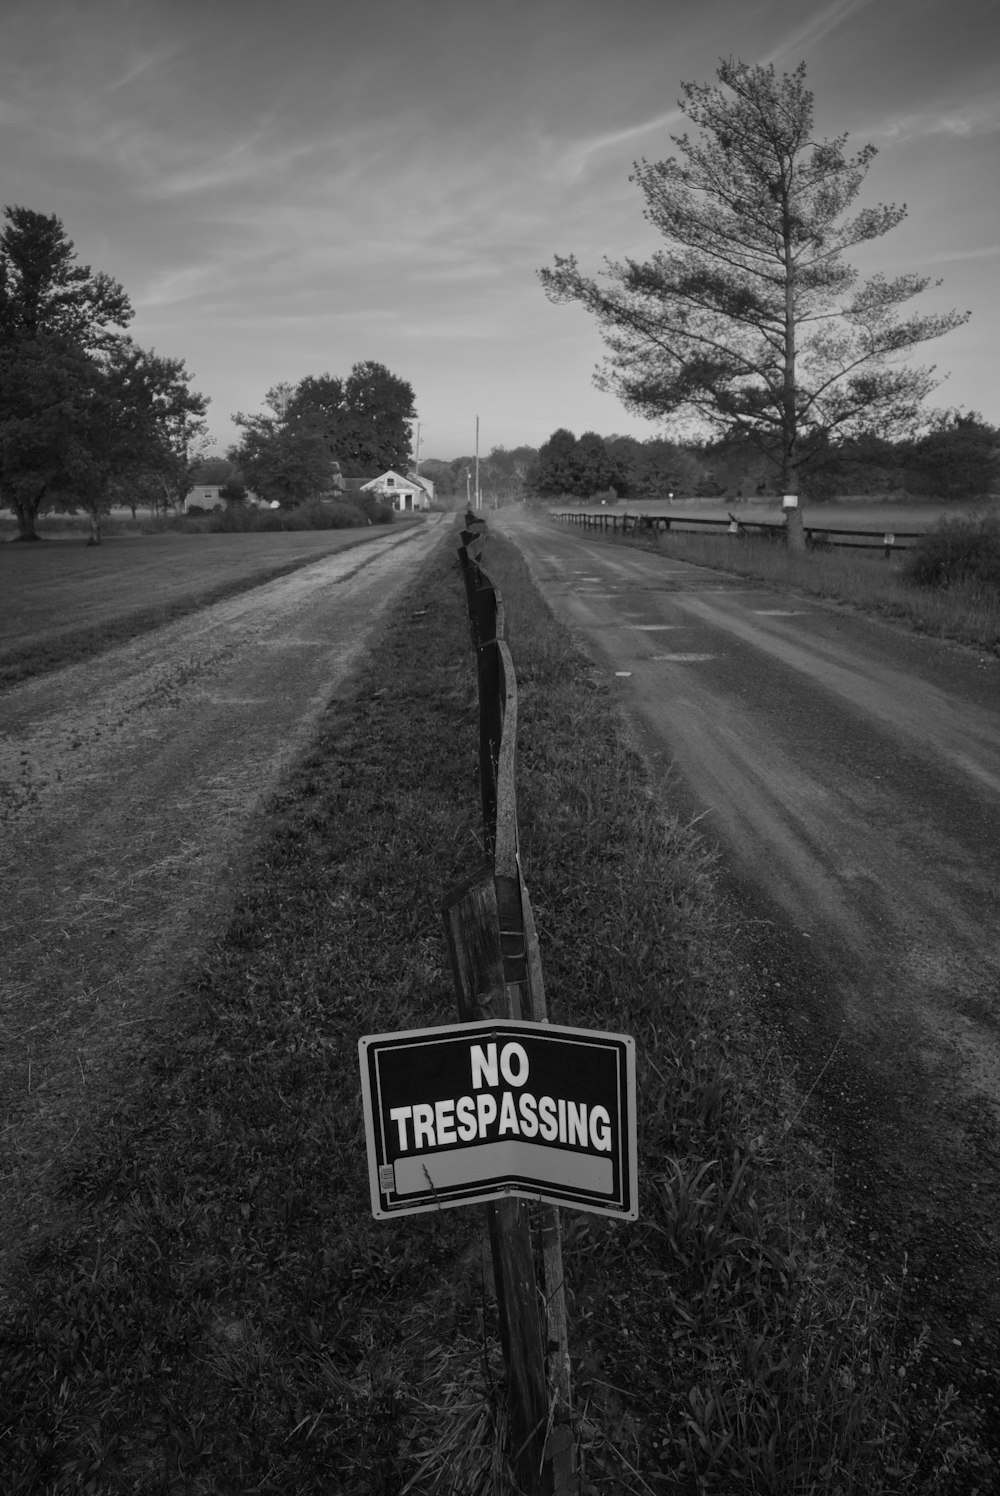 a no trespassing sign on the side of a road